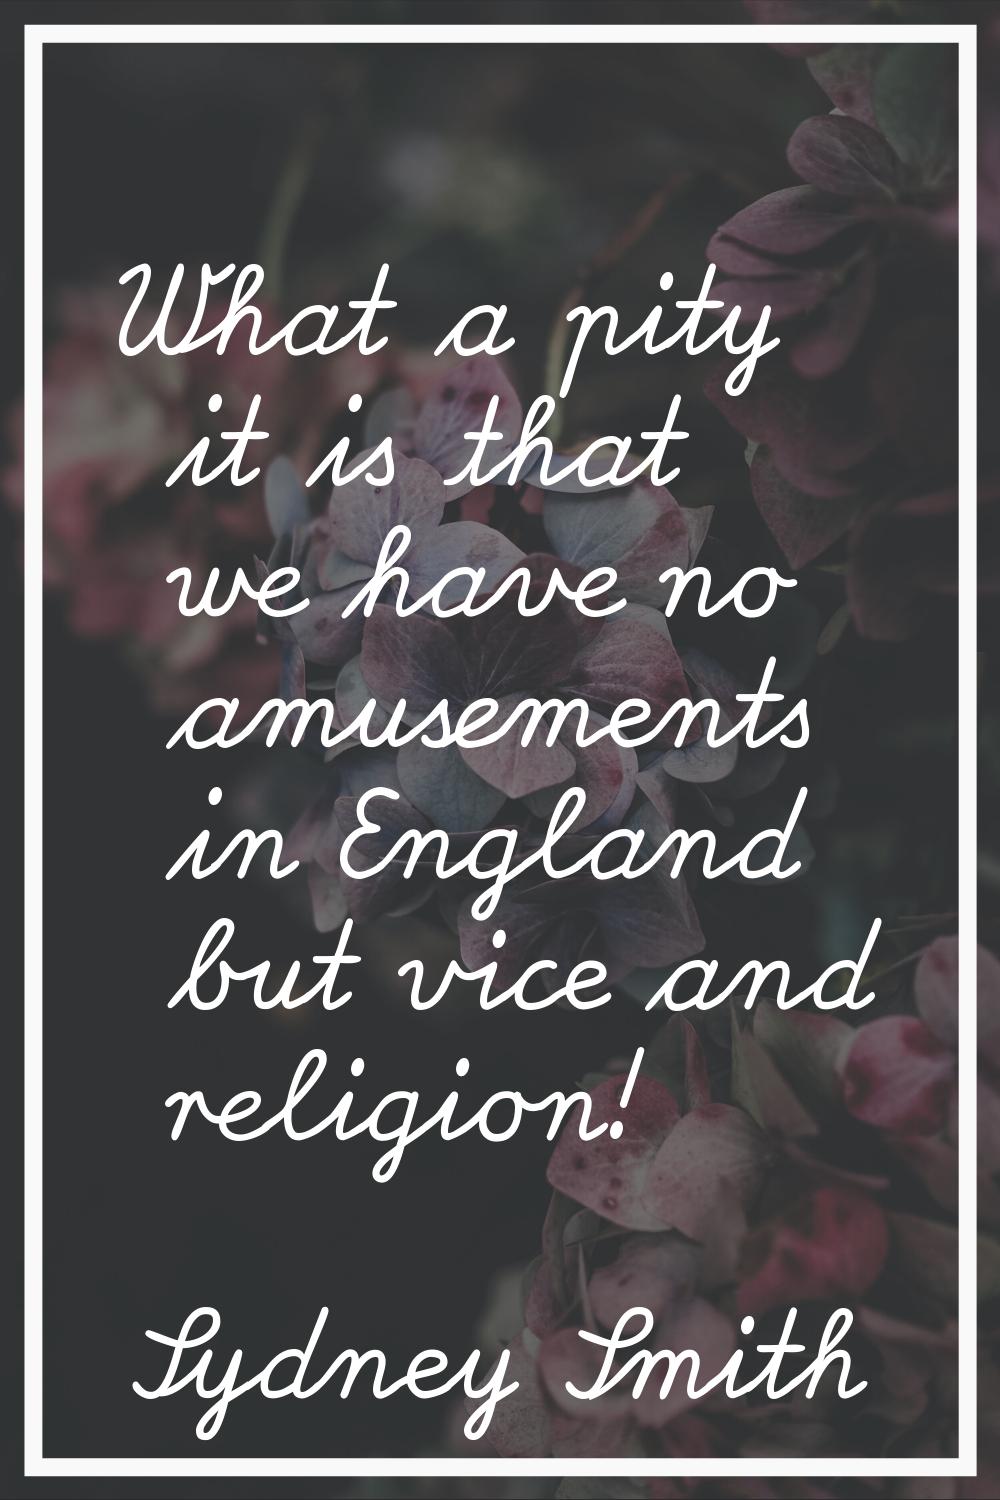 What a pity it is that we have no amusements in England but vice and religion!